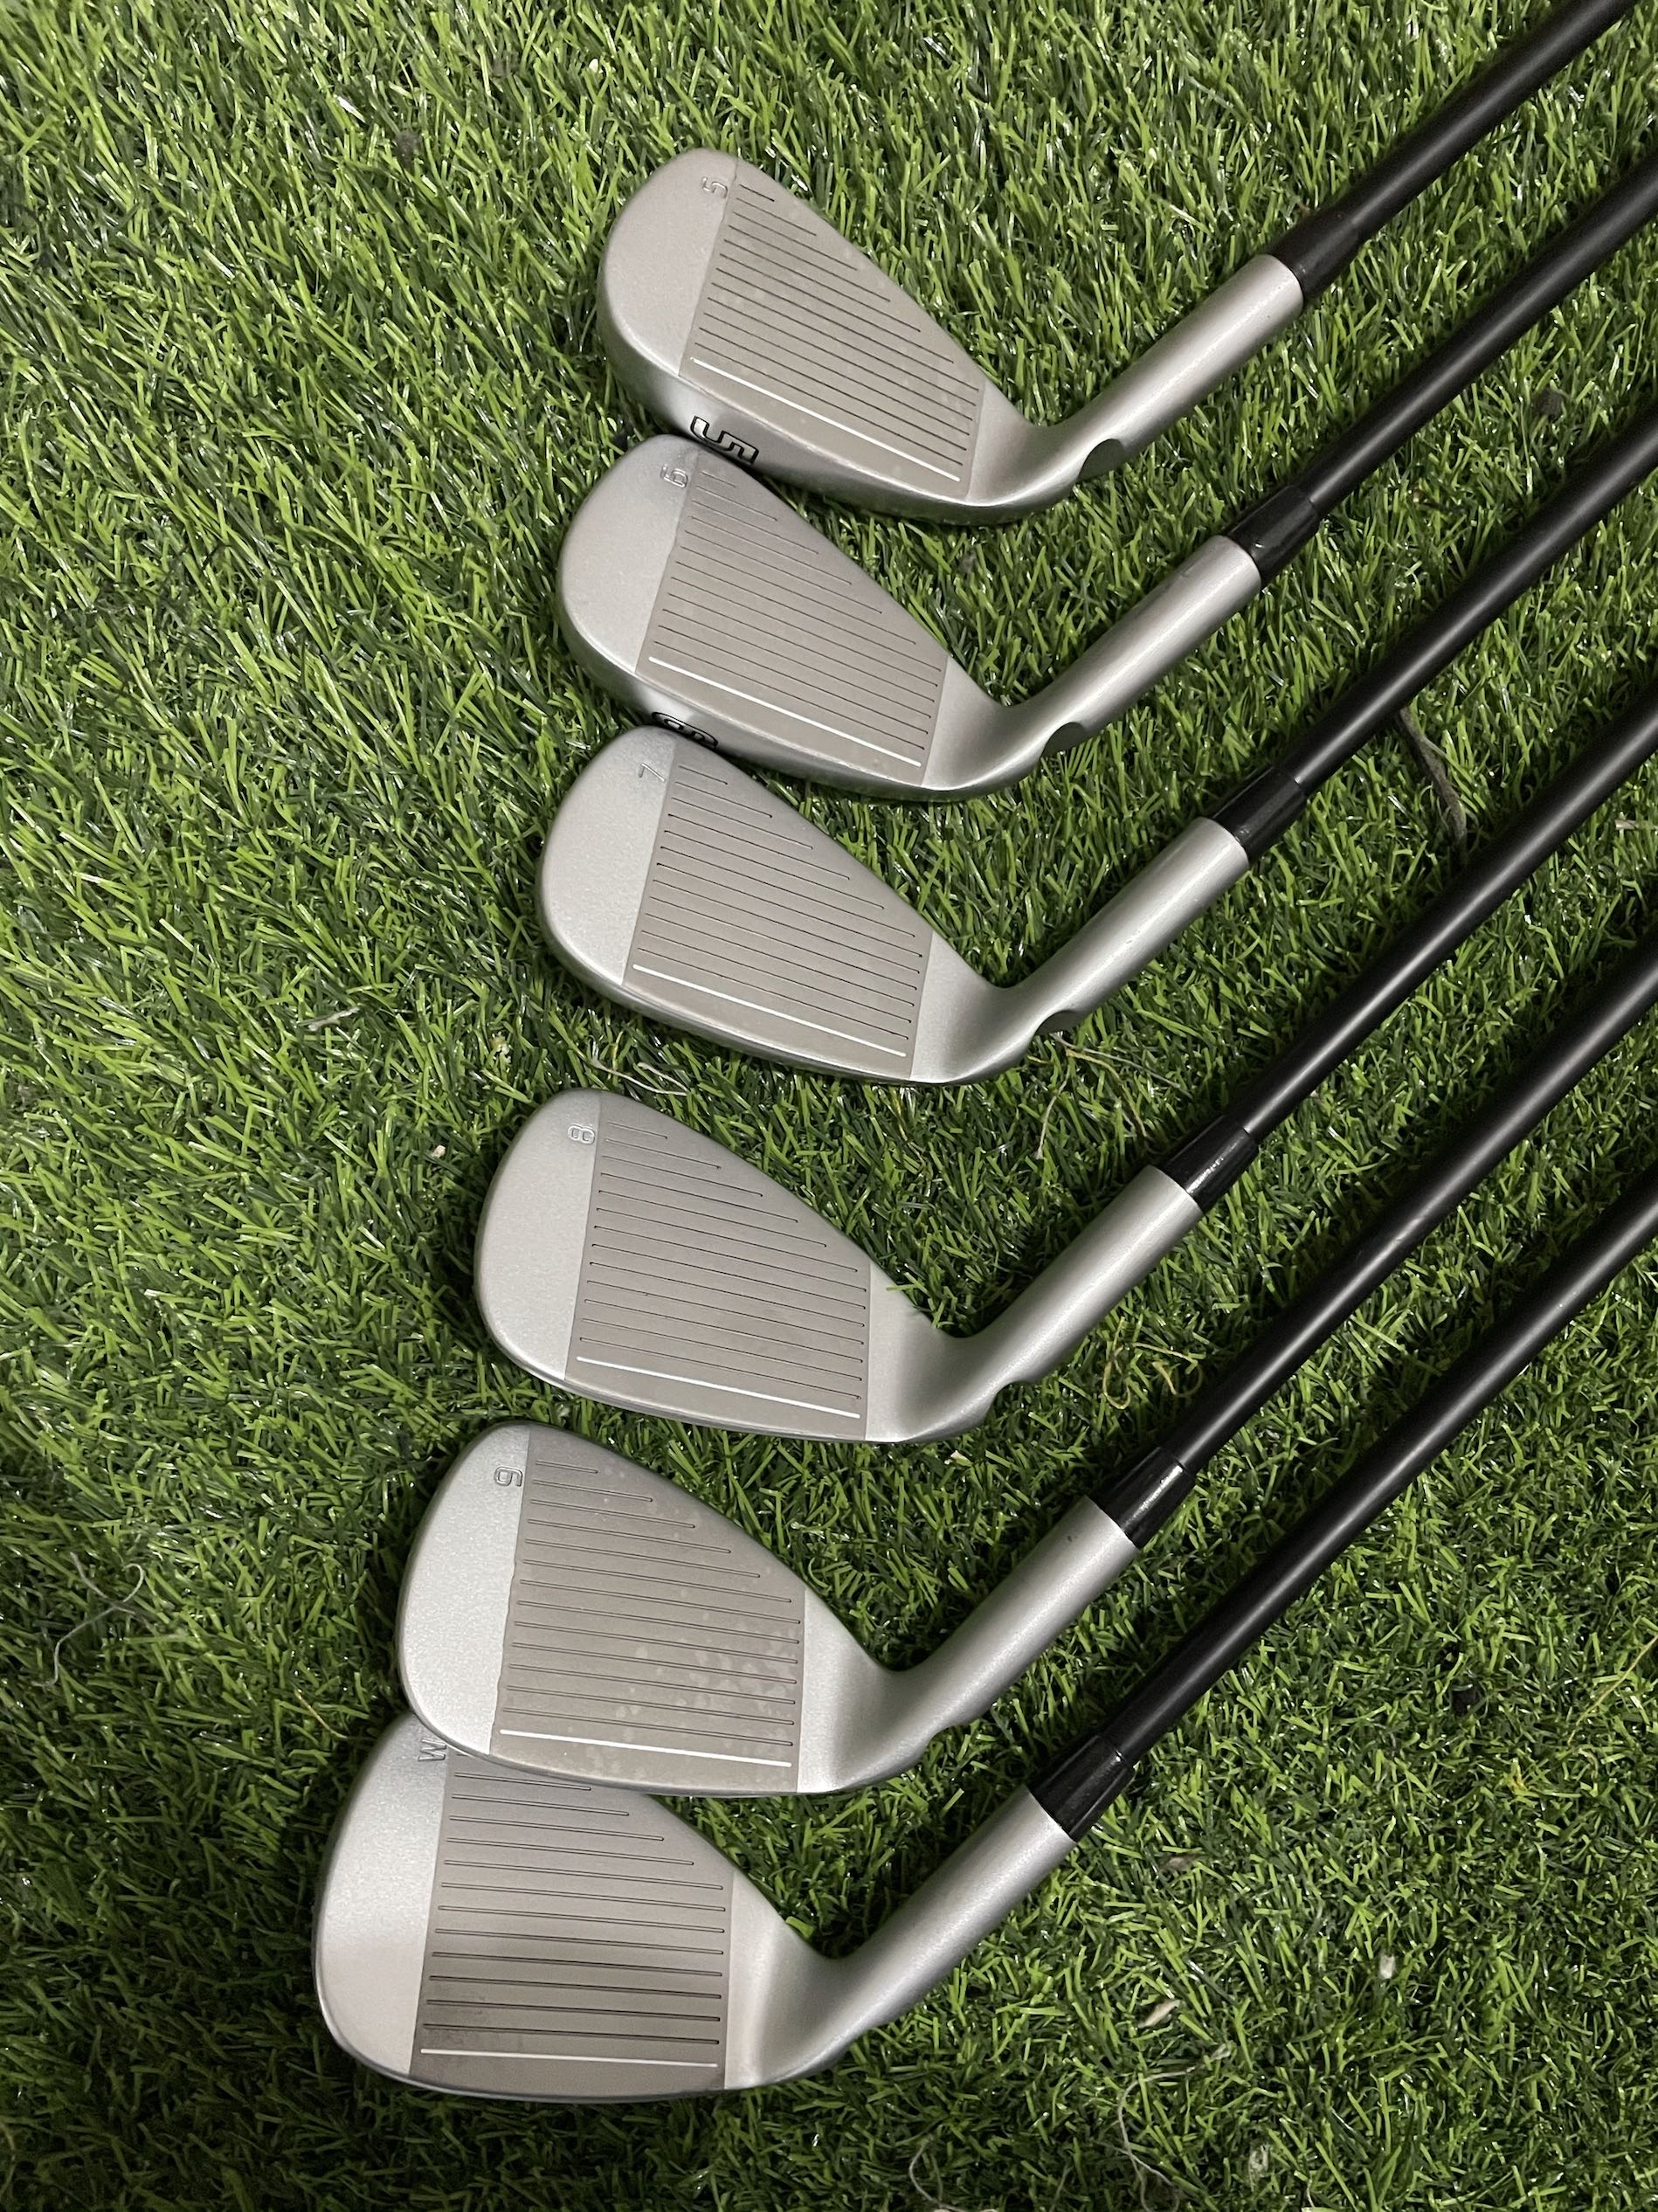 

UPS/FedEx G series 425 Golf Irons 10 Kind Shaft Options Real Photos Contact Seller